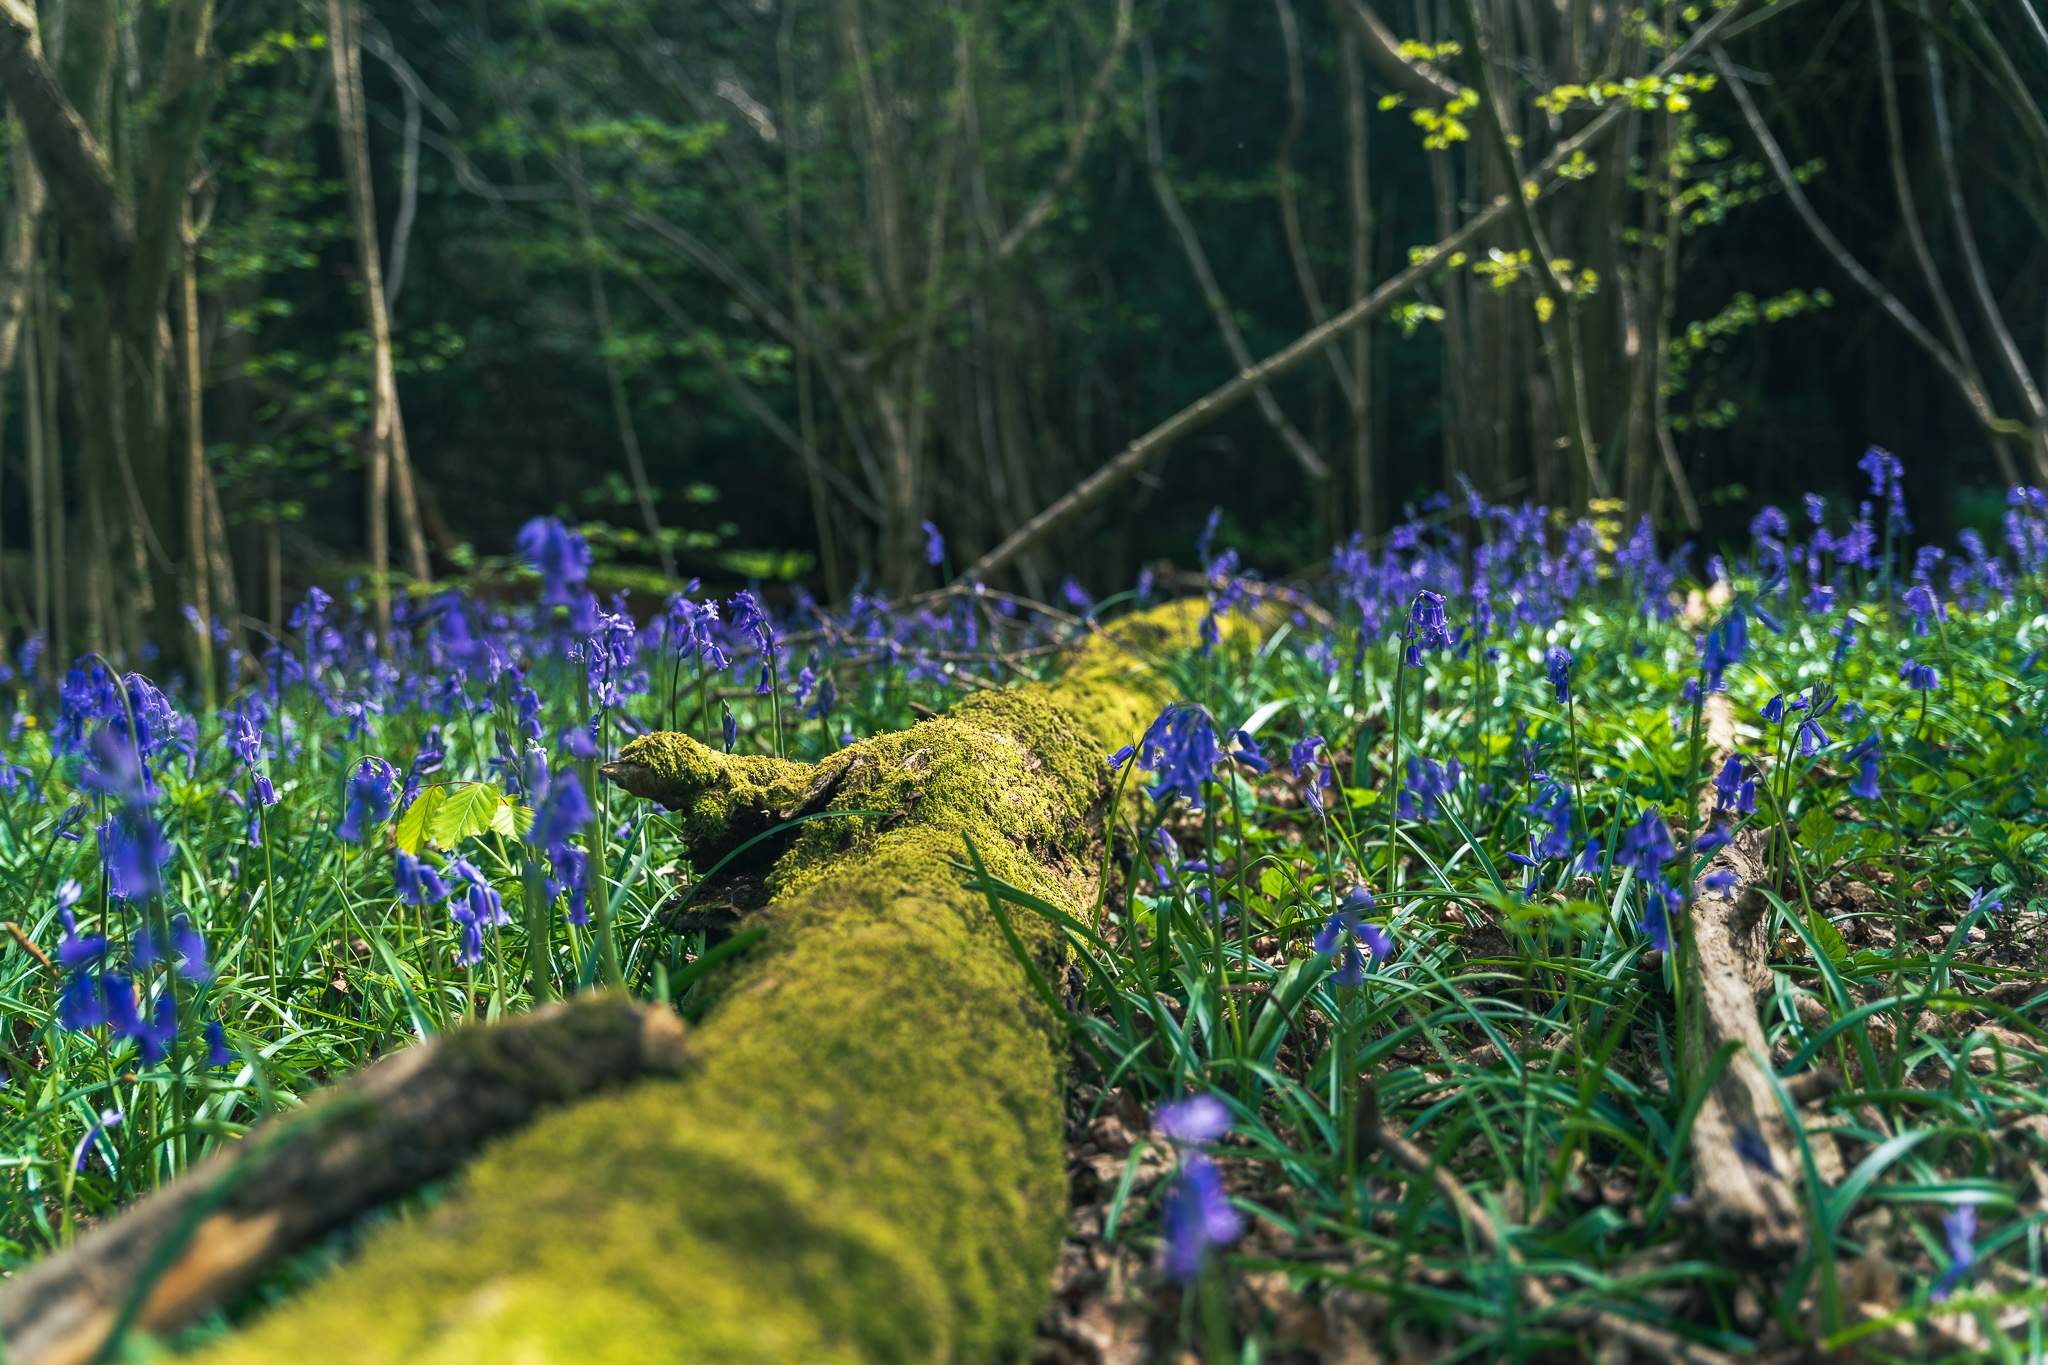 Old, mossy tree trunk surrounded by a beautiful field of Bluebells